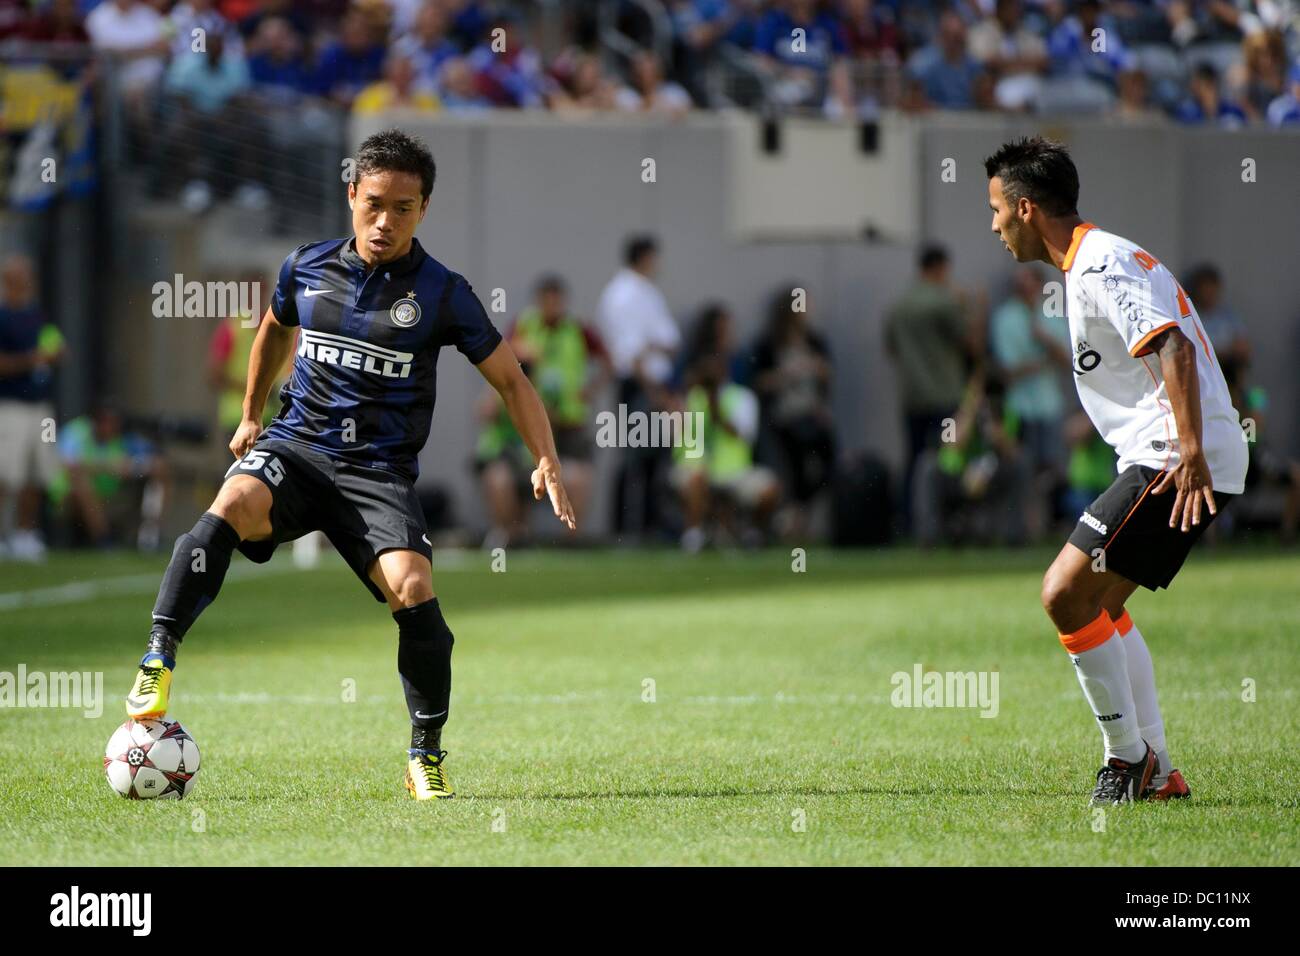 East Rutherford, New Jersey, USA. 4th Aug, 2013. August 04, 2013: Internazionale defender Yuto Nagatomo (55) settles the ball during the Guinness International Champions Cup match between Valencia C.F. and Inter Milan at Met Life Stadium, East Rutherford, NJ. © csm/Alamy Live News Stock Photo